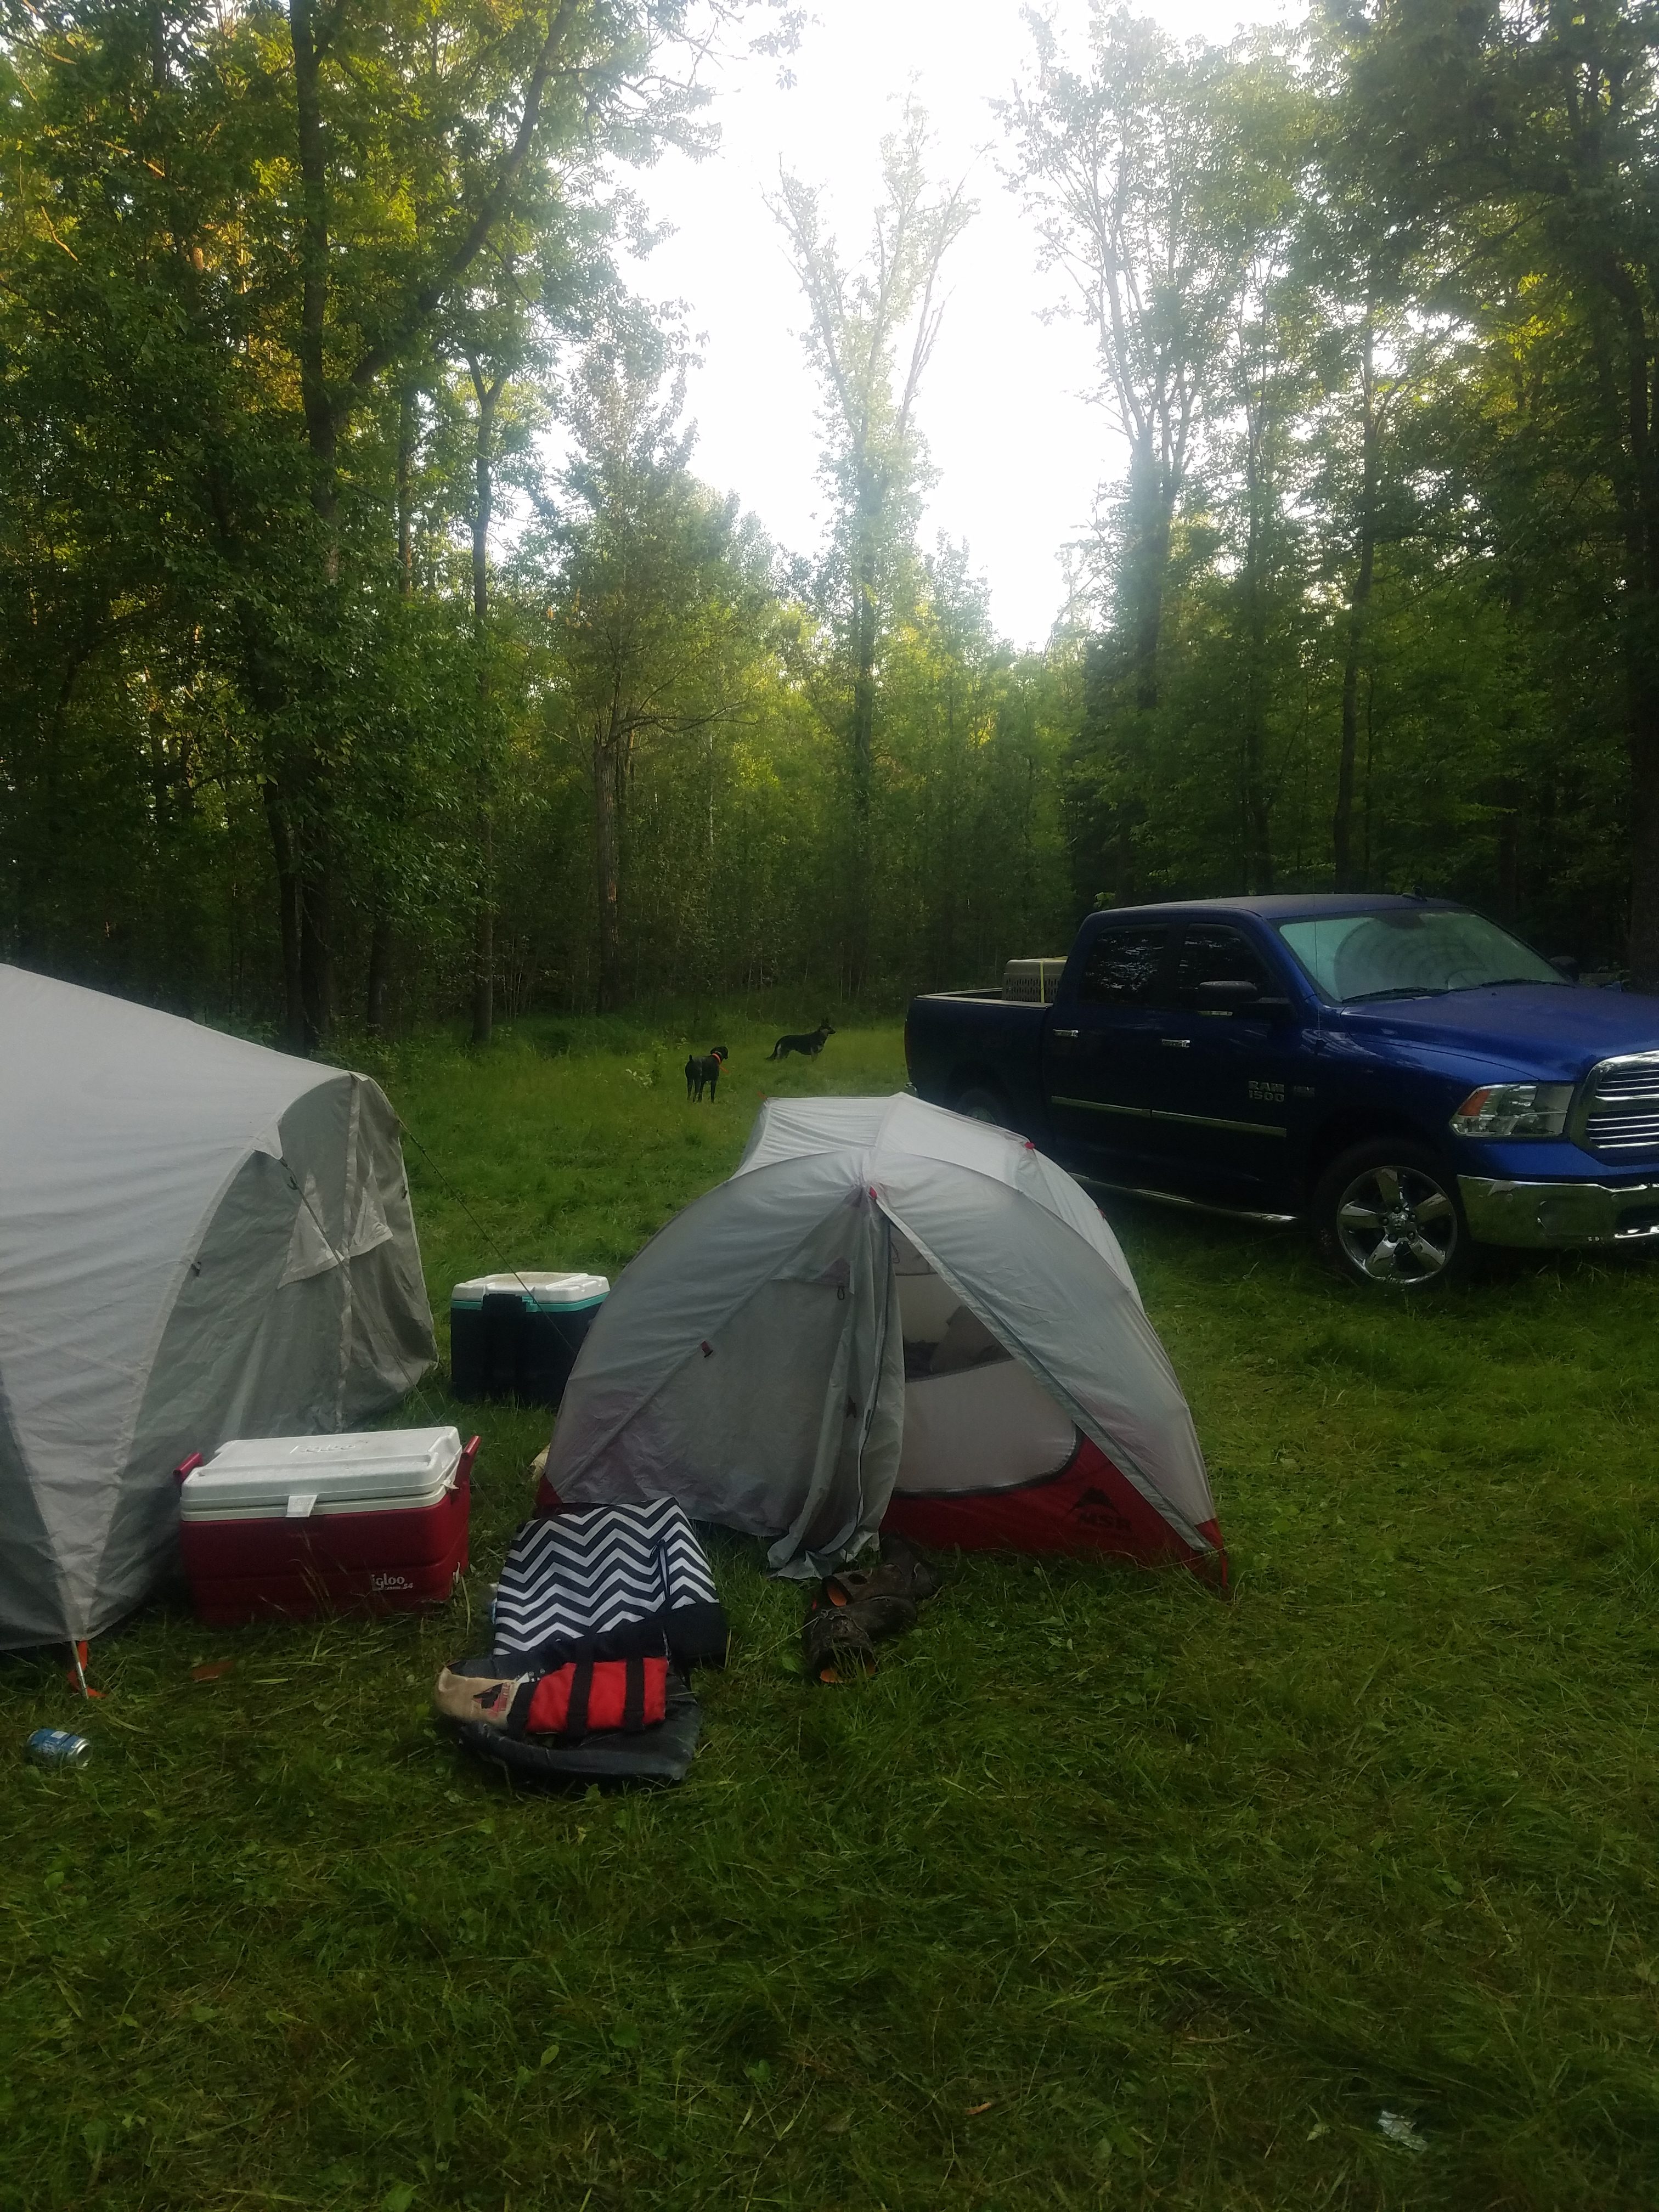 Msr Mutha Hubba Nx 3 Person Tent Classified Ads In Depth Outdoors